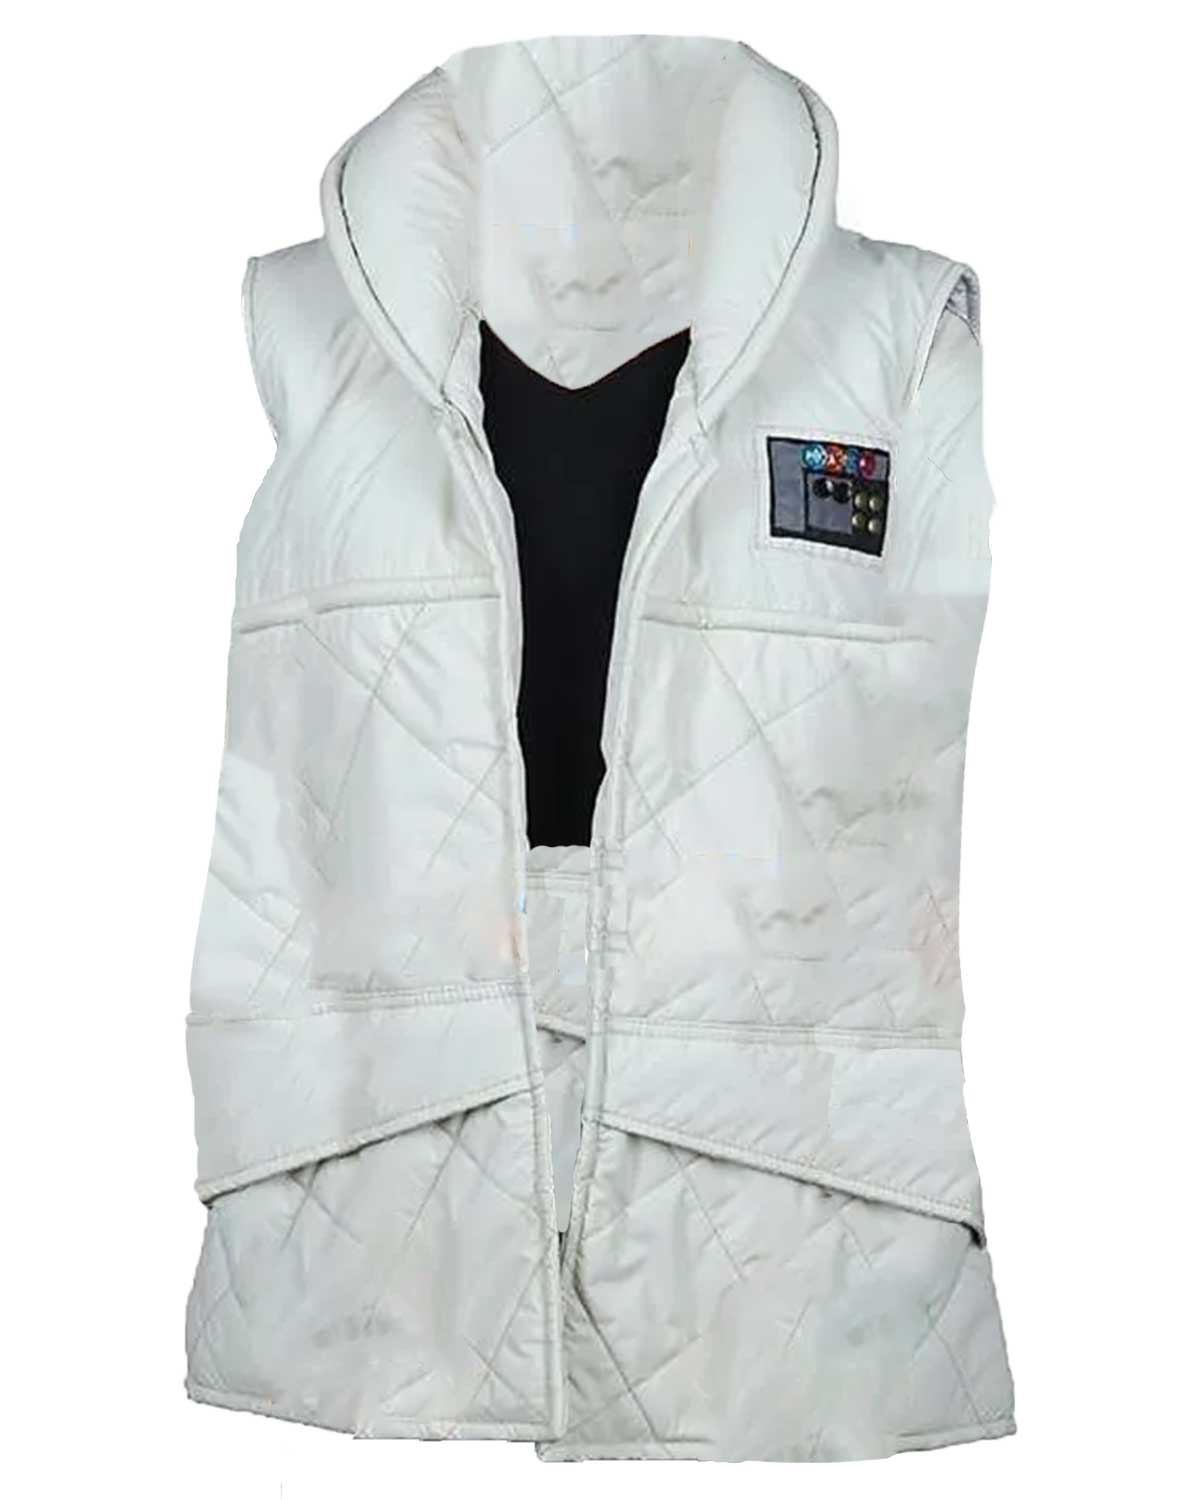 Star Wars The Empire Strikes Back Carrie Fisher Leather Vest